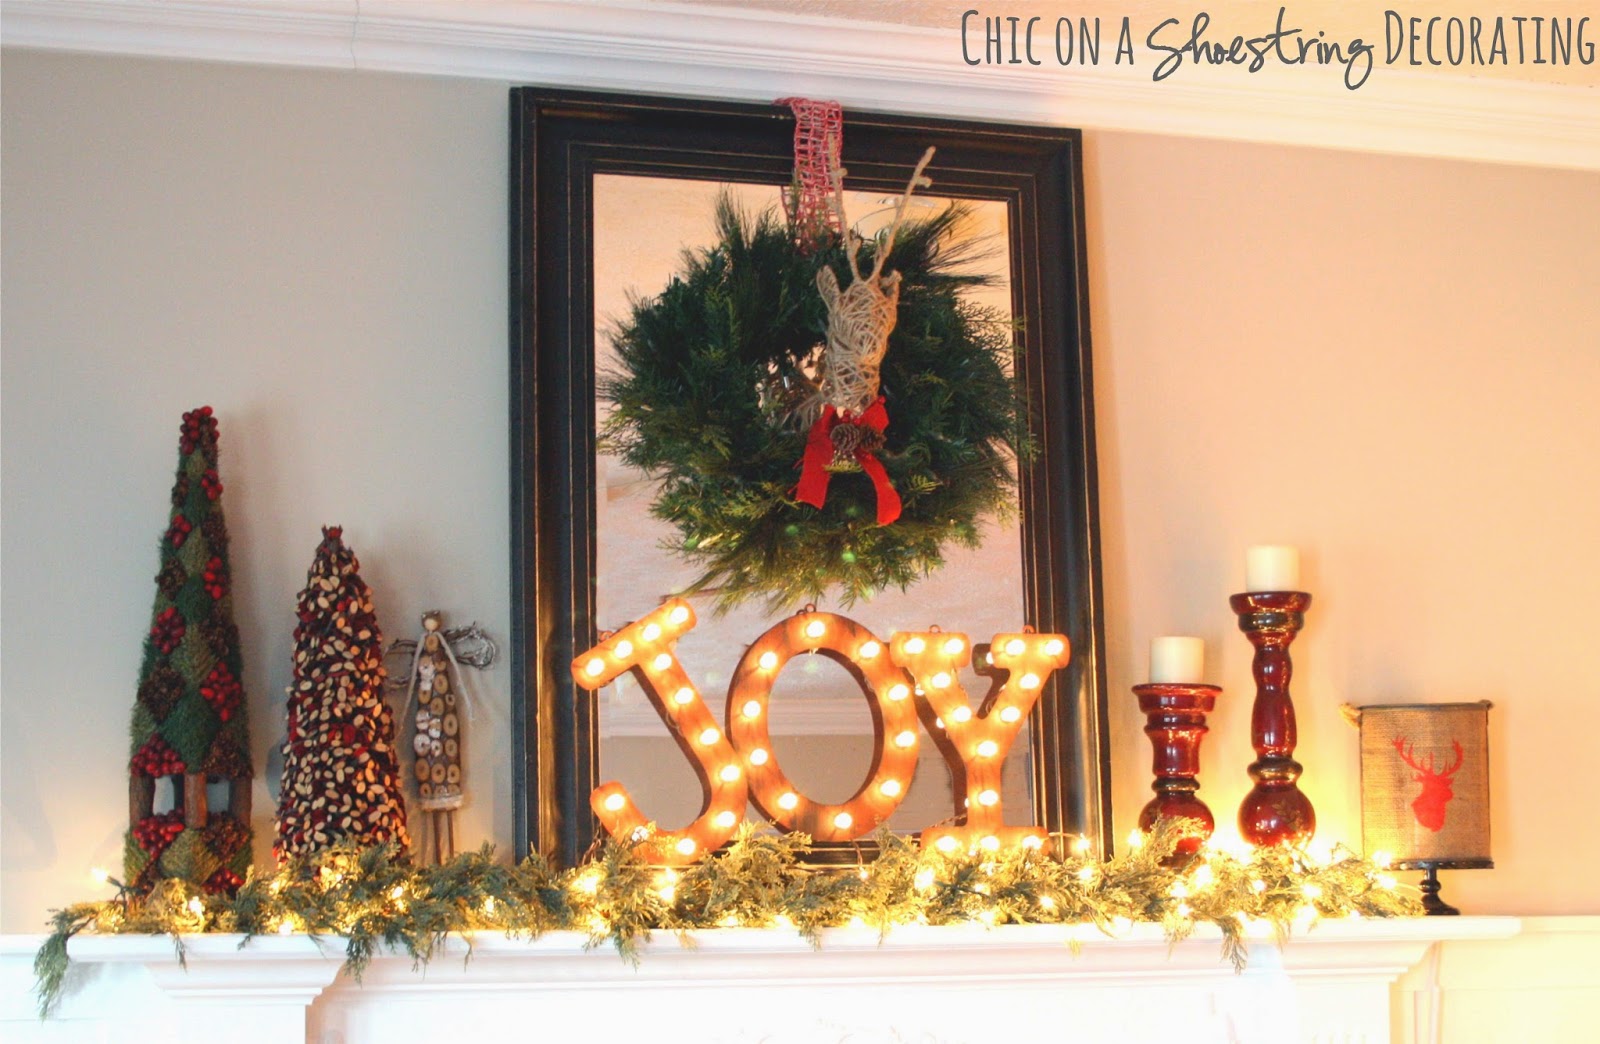 Chic on a Shoestring Decorating Christmas decor